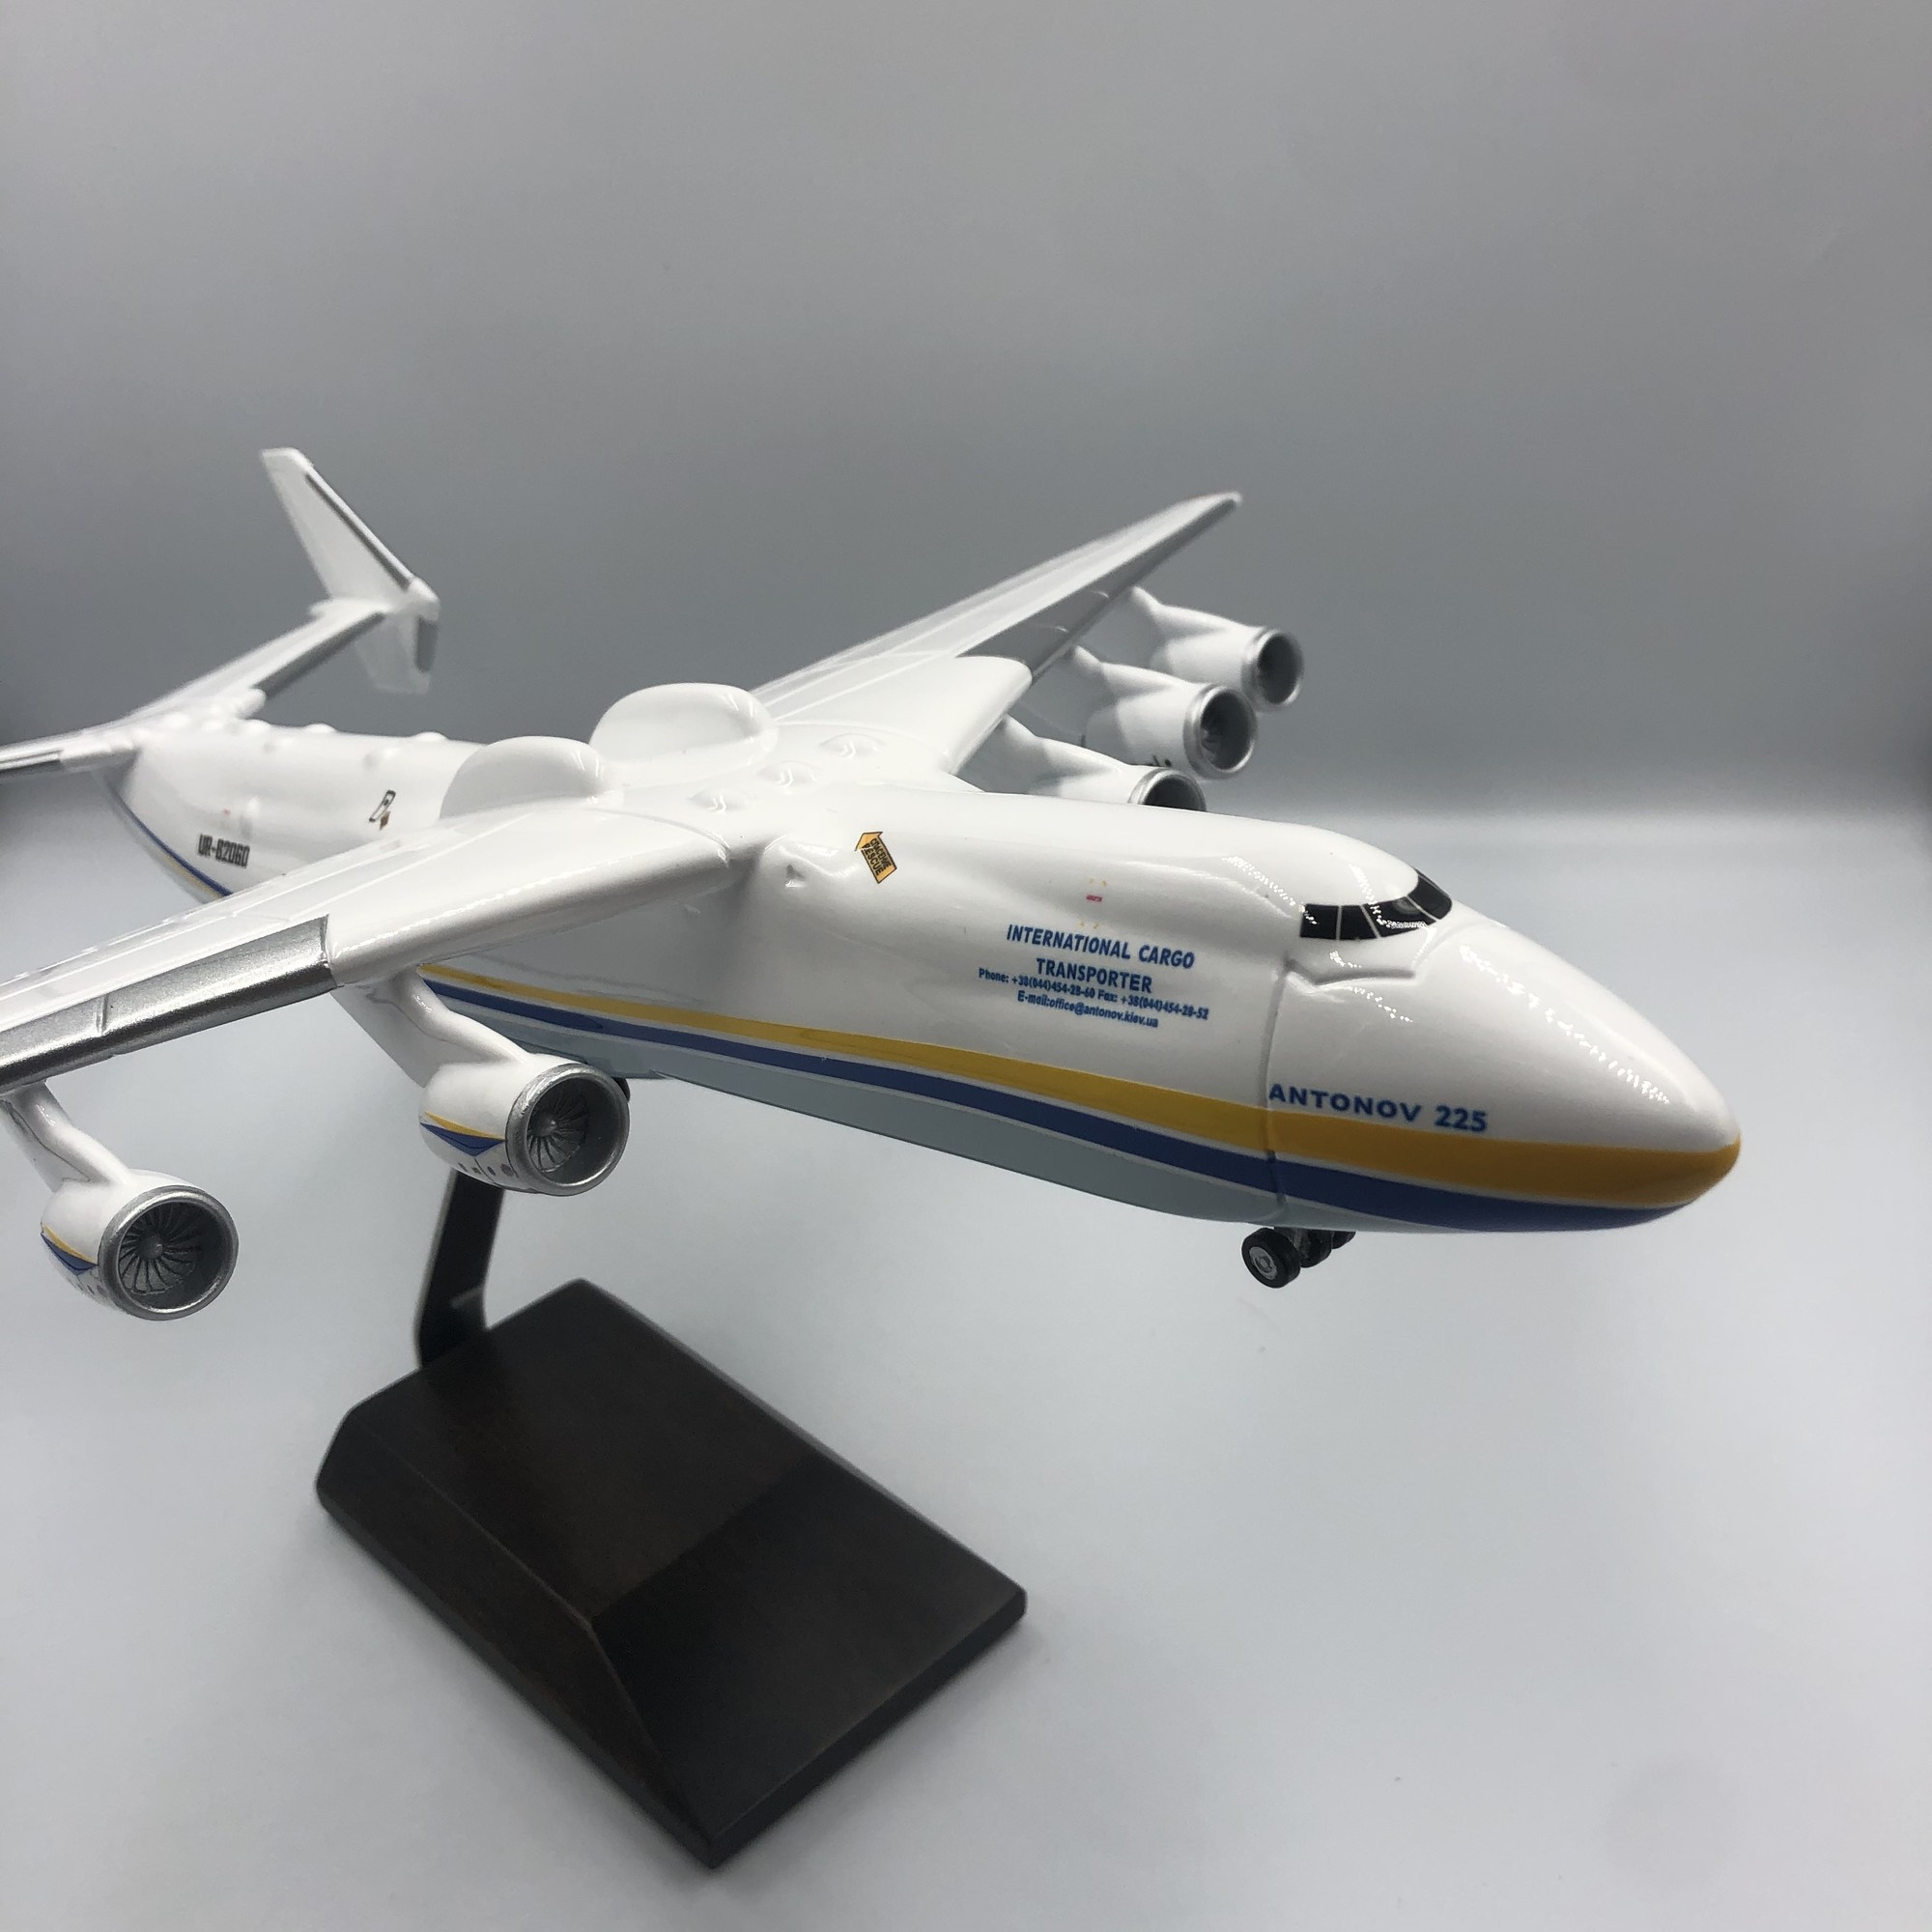 Aircraft model An-225 "Antonov Airlines" - 1/200 on landing gears